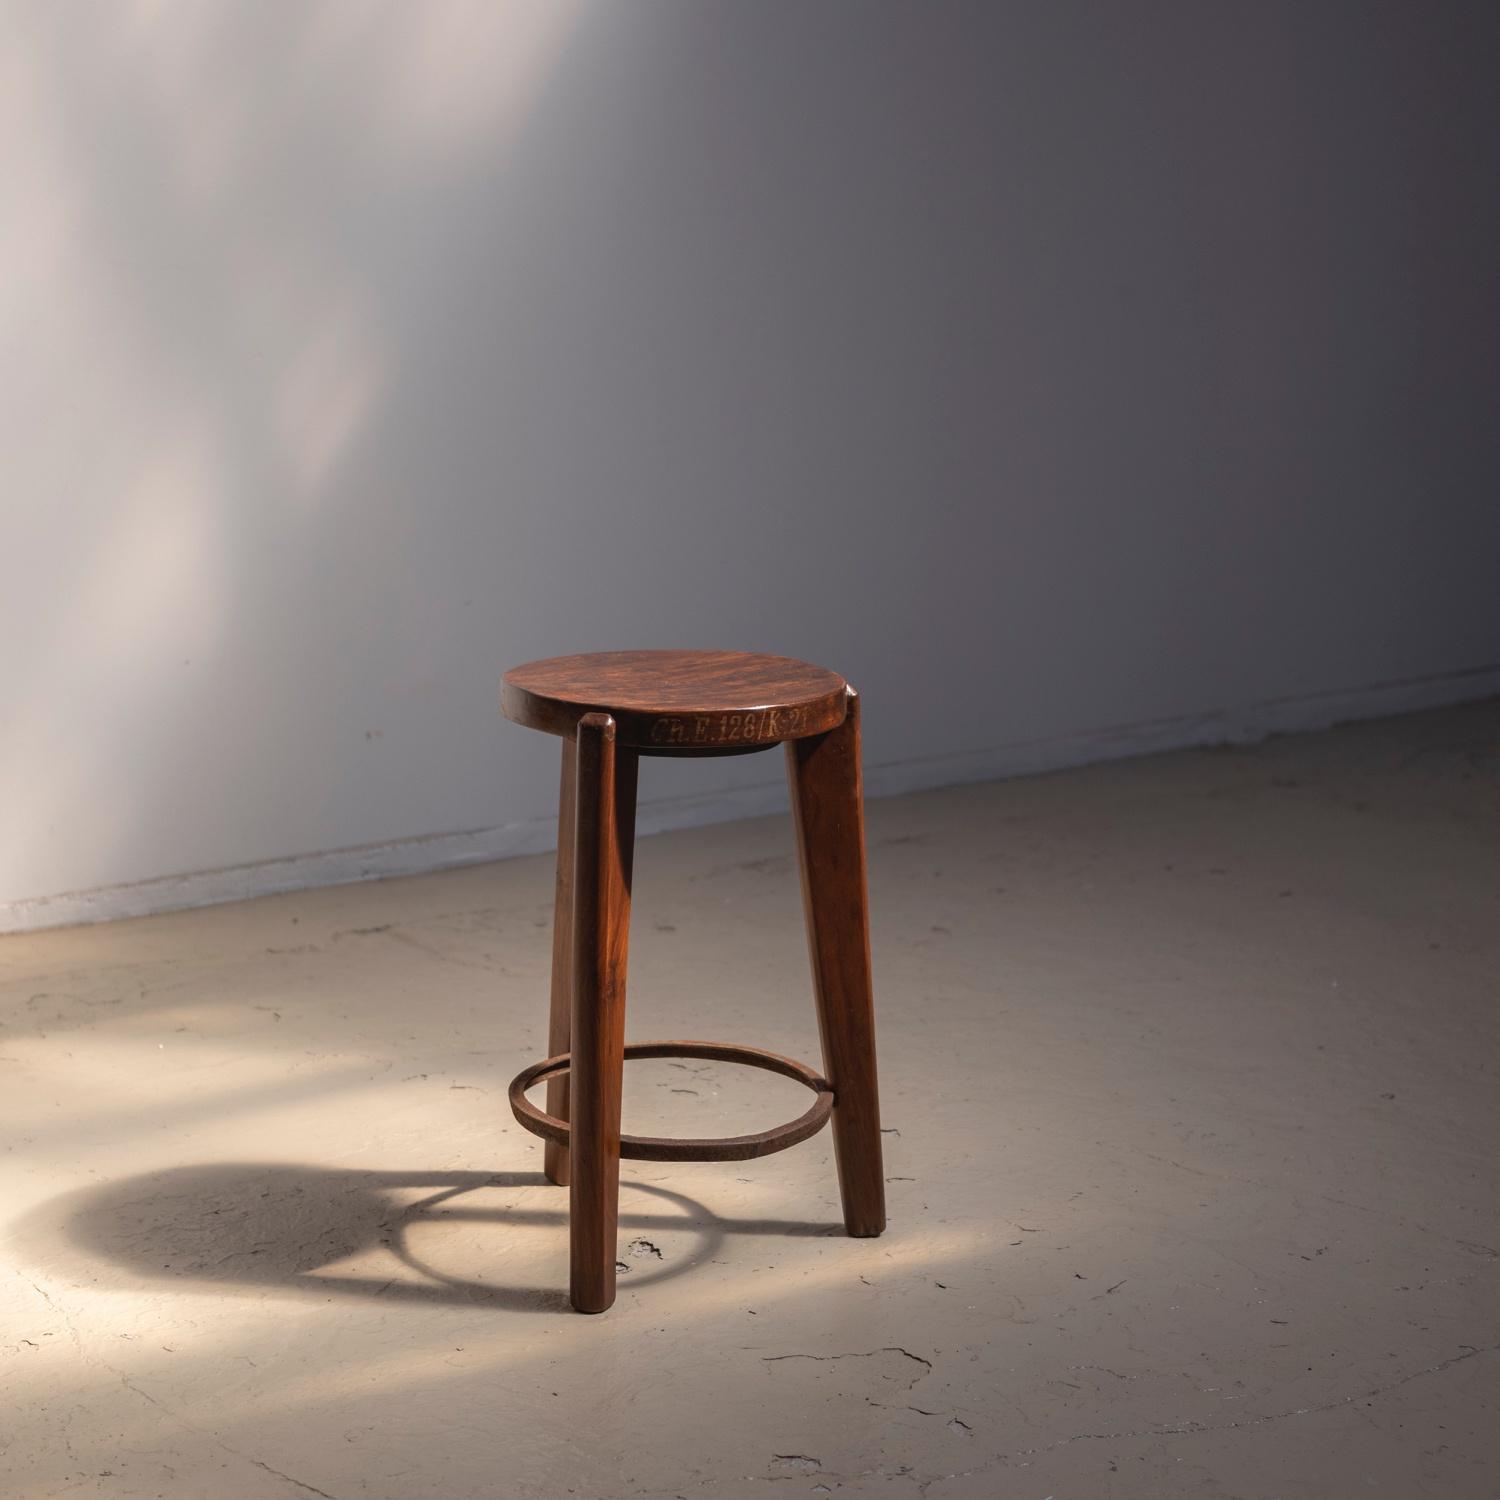 High Stool with iron ring - Objet d' art